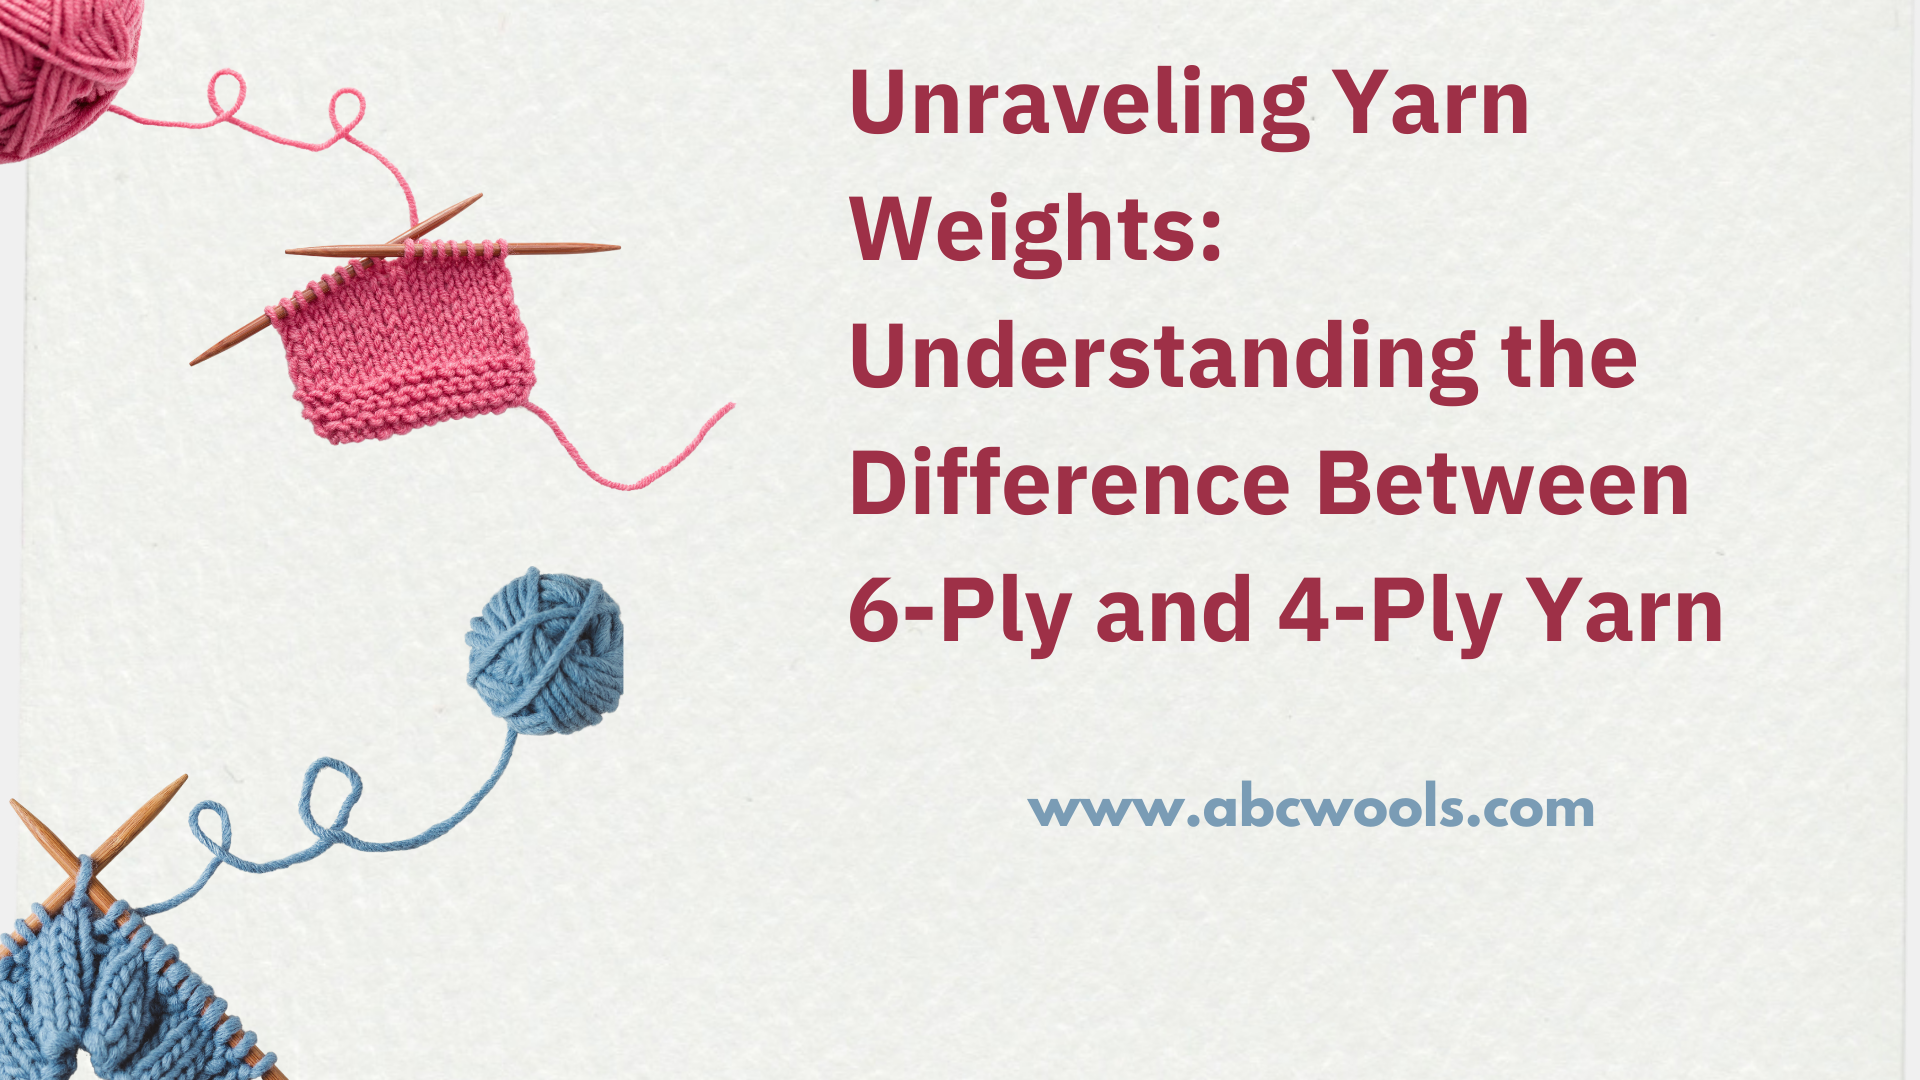 6-Ply and 4-Ply Yarn